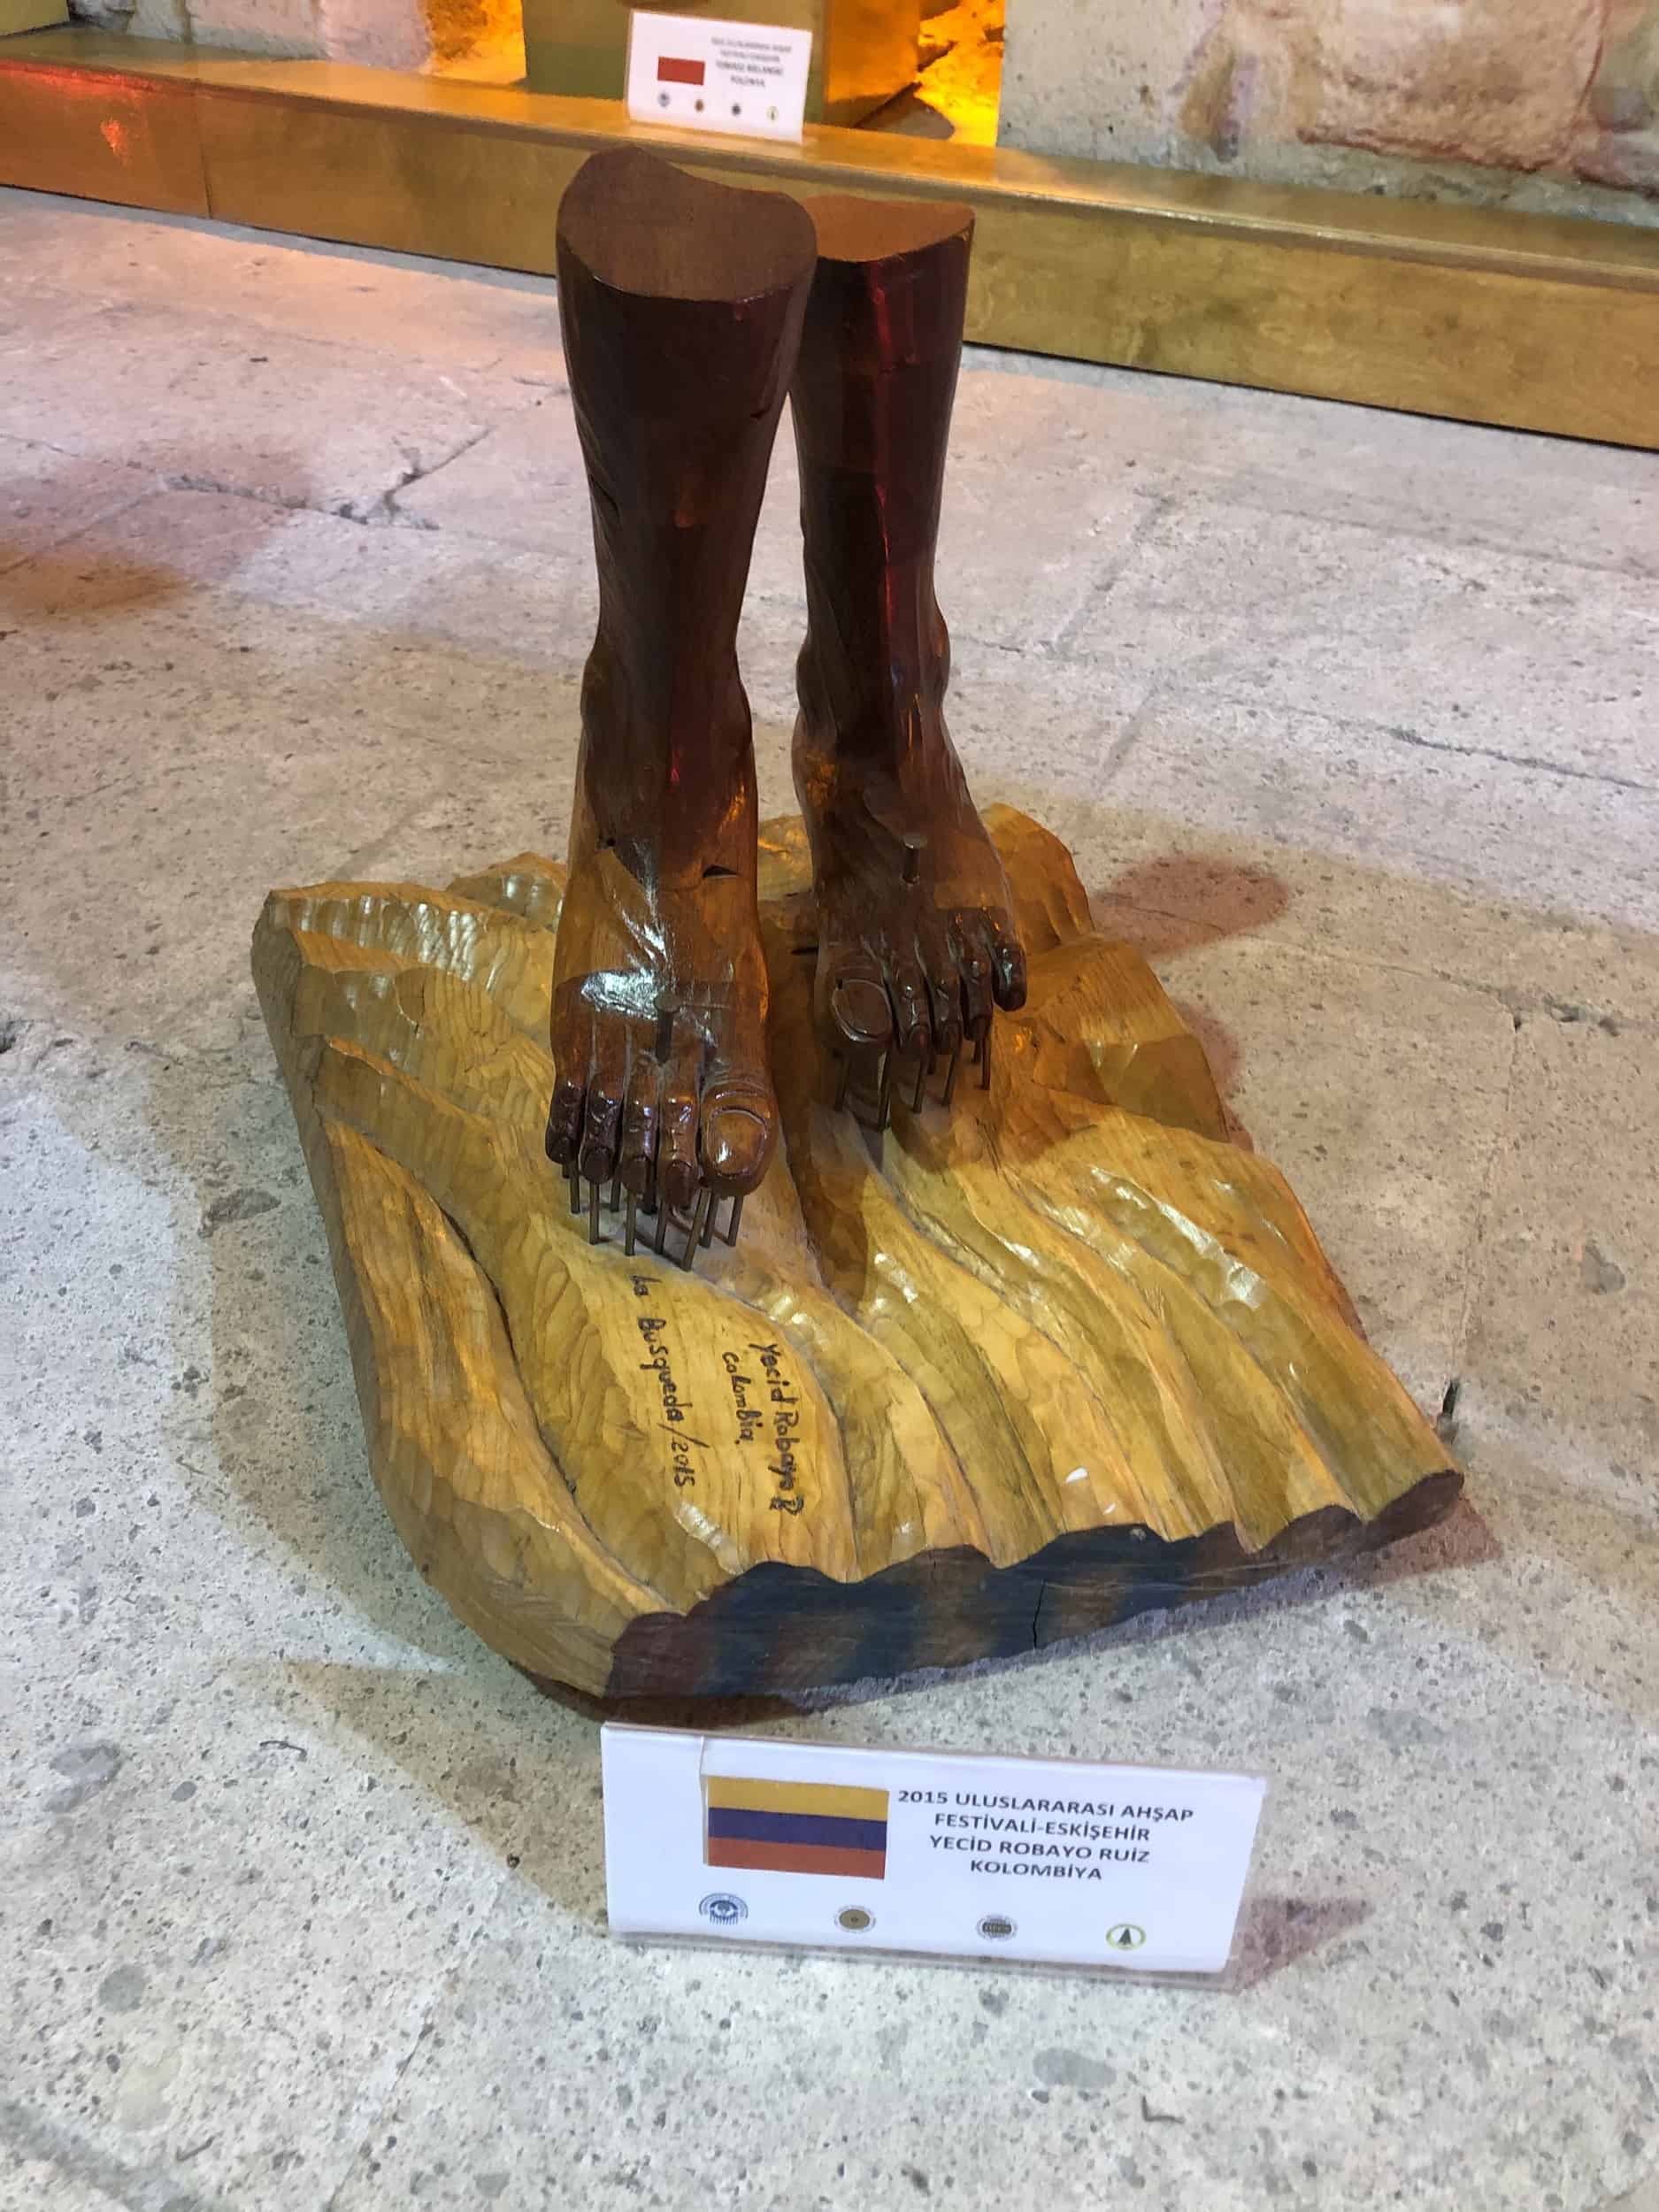 Wood sculpture by an artist from Colombia